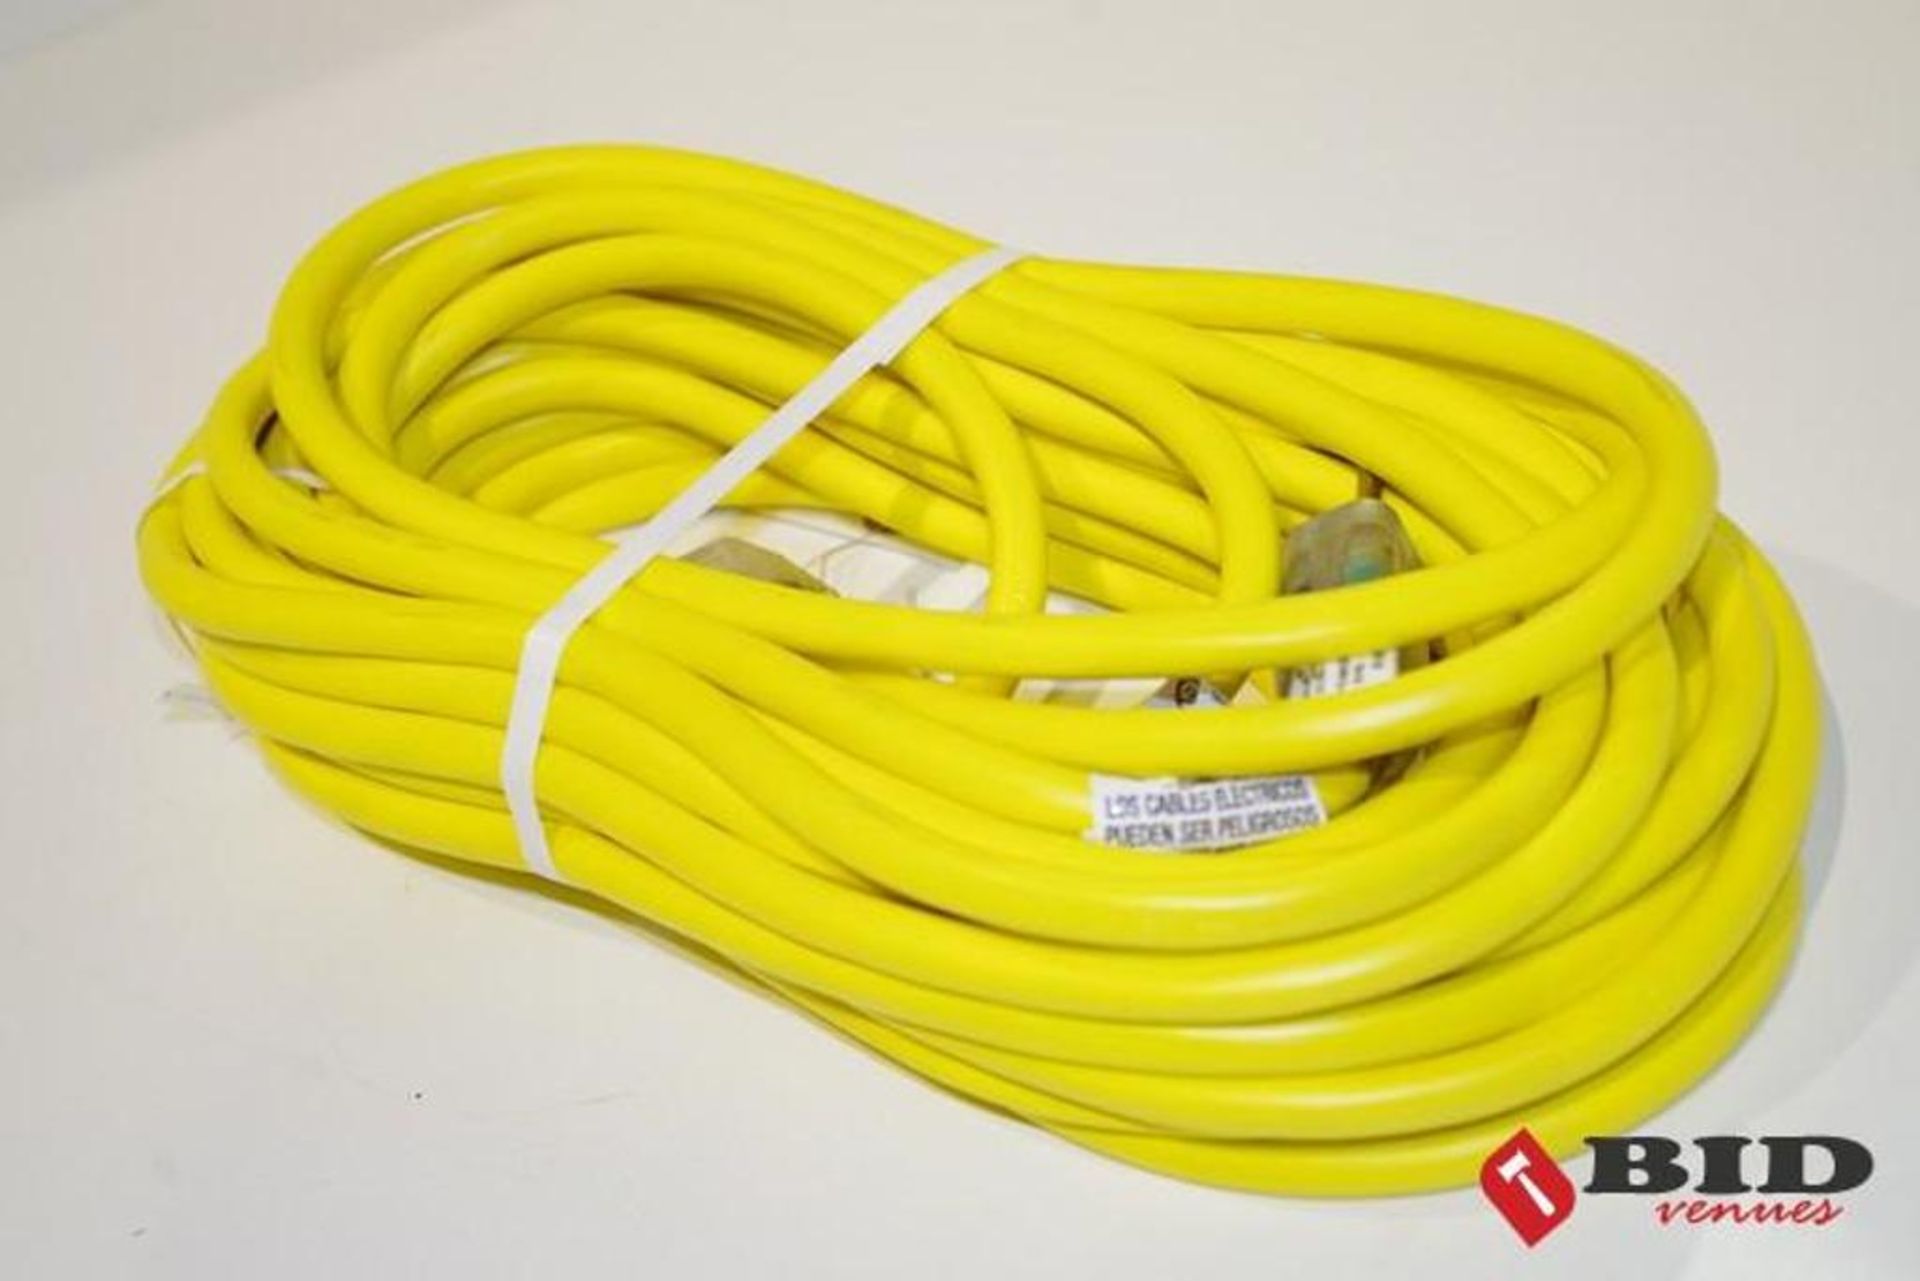 NEW 50 Ft. 12 Gauge Extension Cord w/ Lighted Ends (Yellow), Made in USA